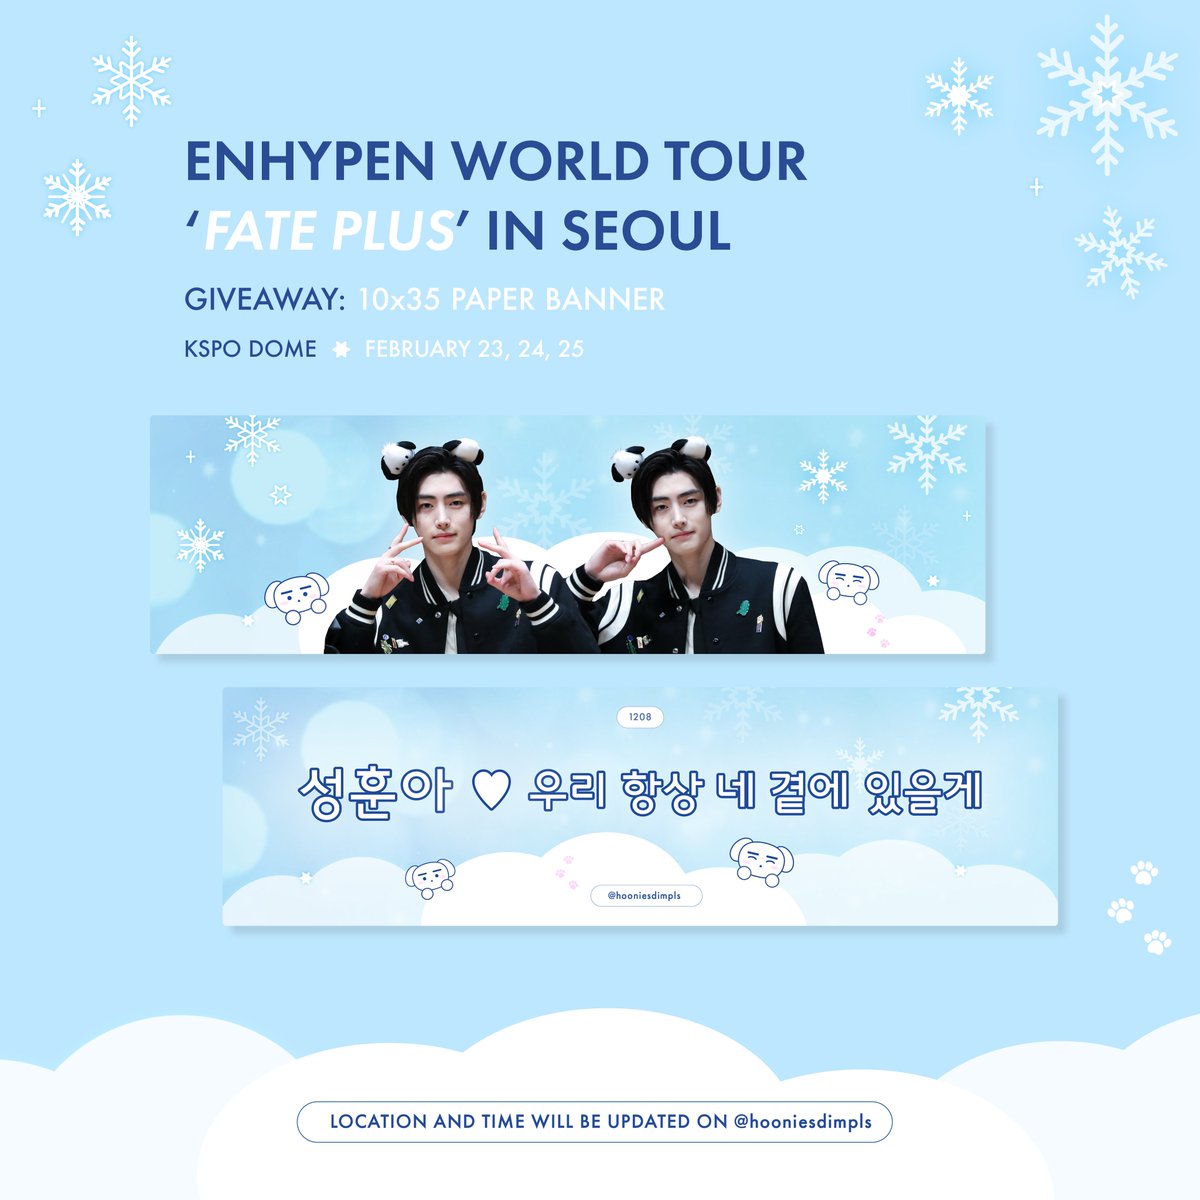 FATE PLUS in SEOUL ᯓ★ ❄️ Give Away event for SUNGHOON 𝘼𝙡𝙬𝙖𝙮𝙨 𝙗𝙮 𝙮𝙤𝙪𝙧 𝙨𝙞𝙙𝙚 ᡣ𐭩 ༄ 50 paper banners each day ༄ KSPO DOME ༄ exact time & location tba~! ༄ like, rt, ticket holder ONLY ⋆꙳·❅*‧ ‧*❆ ₊⋆ #성훈 #SUNGHOON #ソンフン #ENHYPEN #엔하이픈